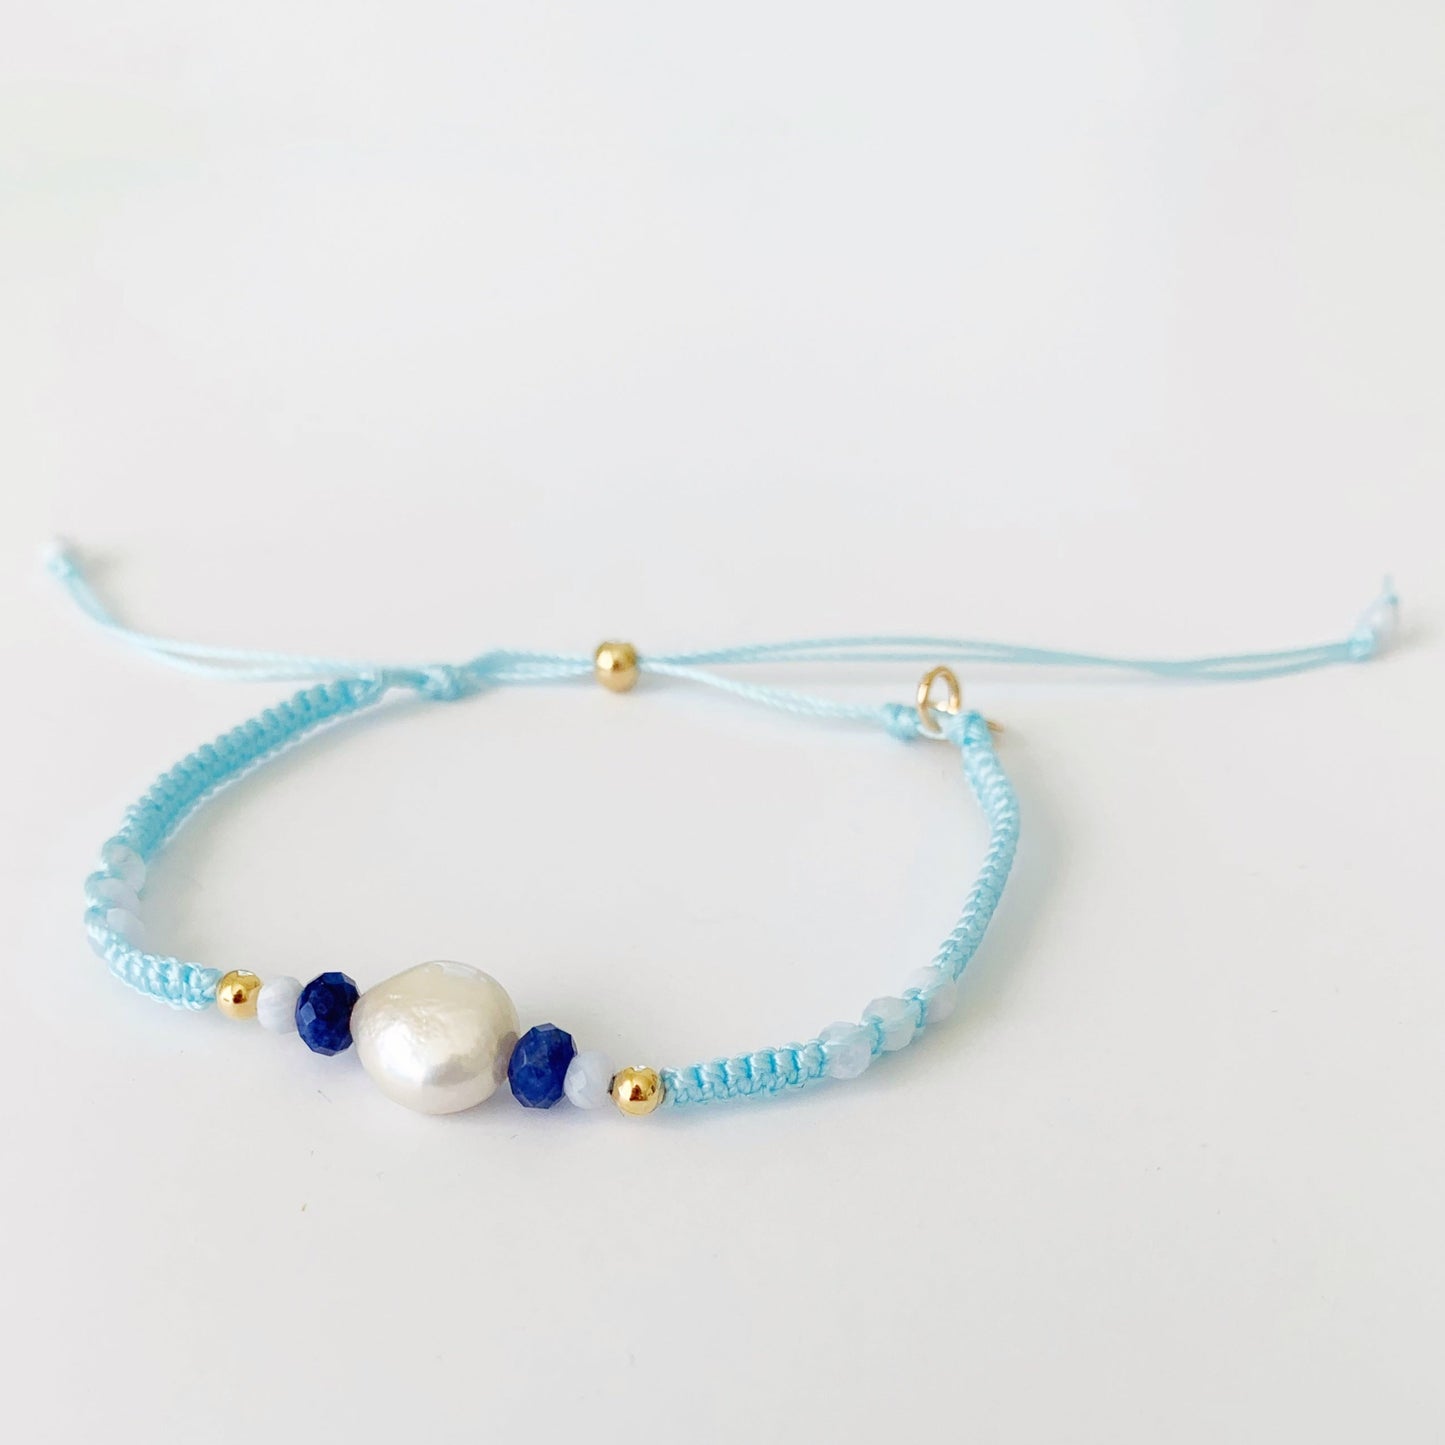 The forget me knot macrame bracelet is a light blue friendship bracelet with a freshwater coin pearl, and semiprecious beads at the center with a 14k gold filled slide bead clasp. this bracelet is pictured on a white surface